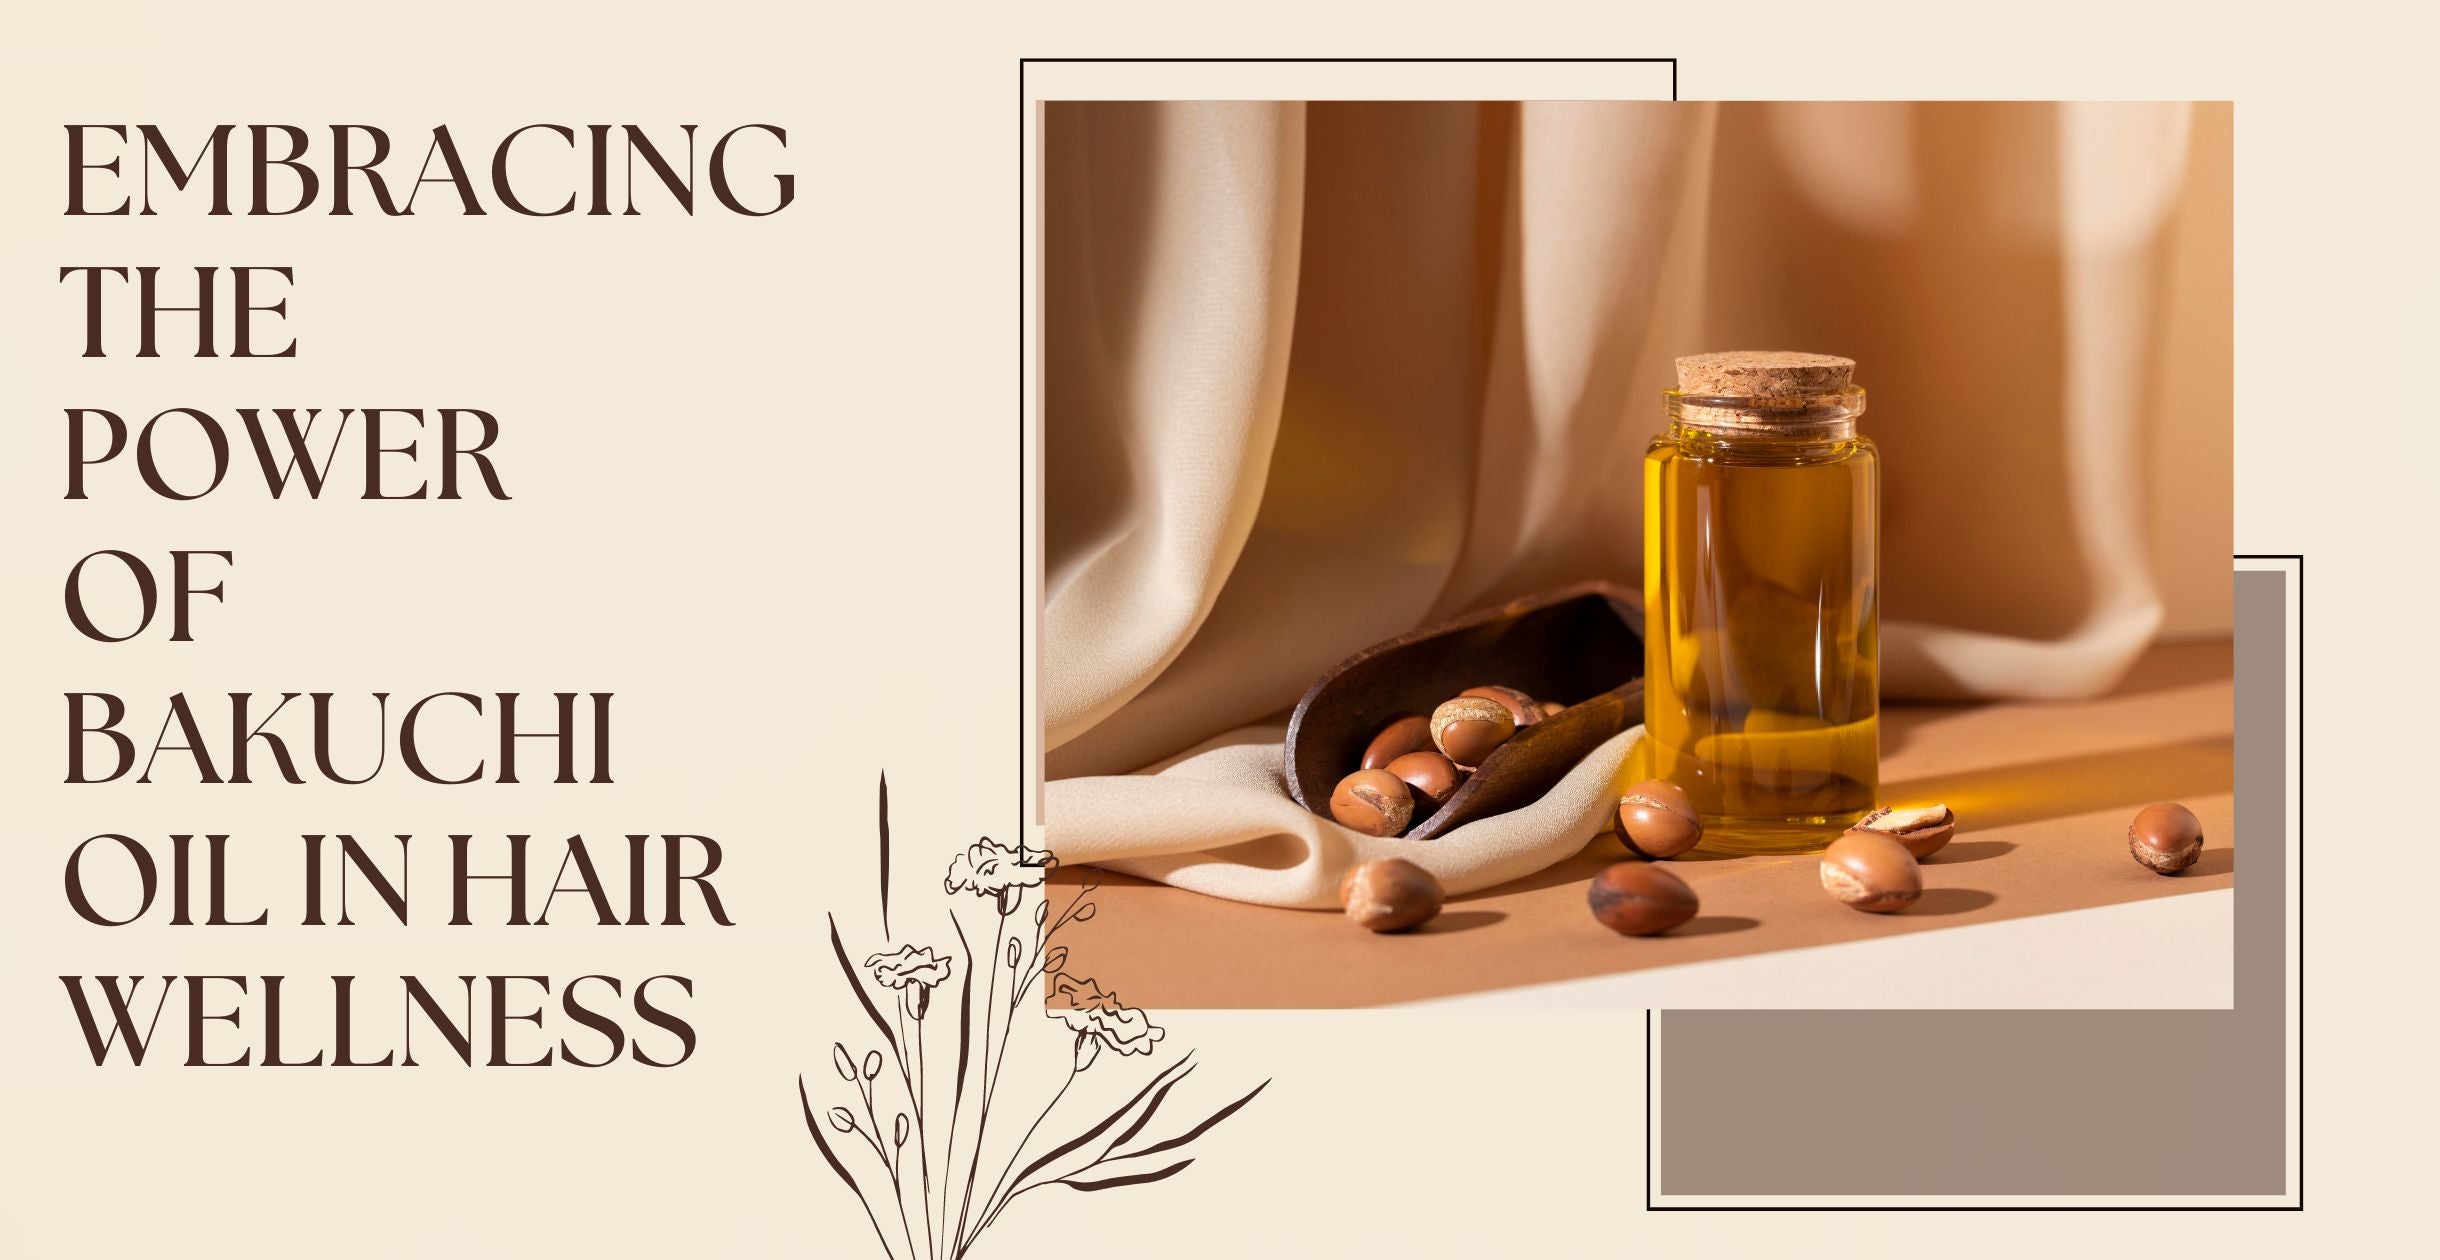 Embracing the Power of Bakuchi Oil in Hair Wellness